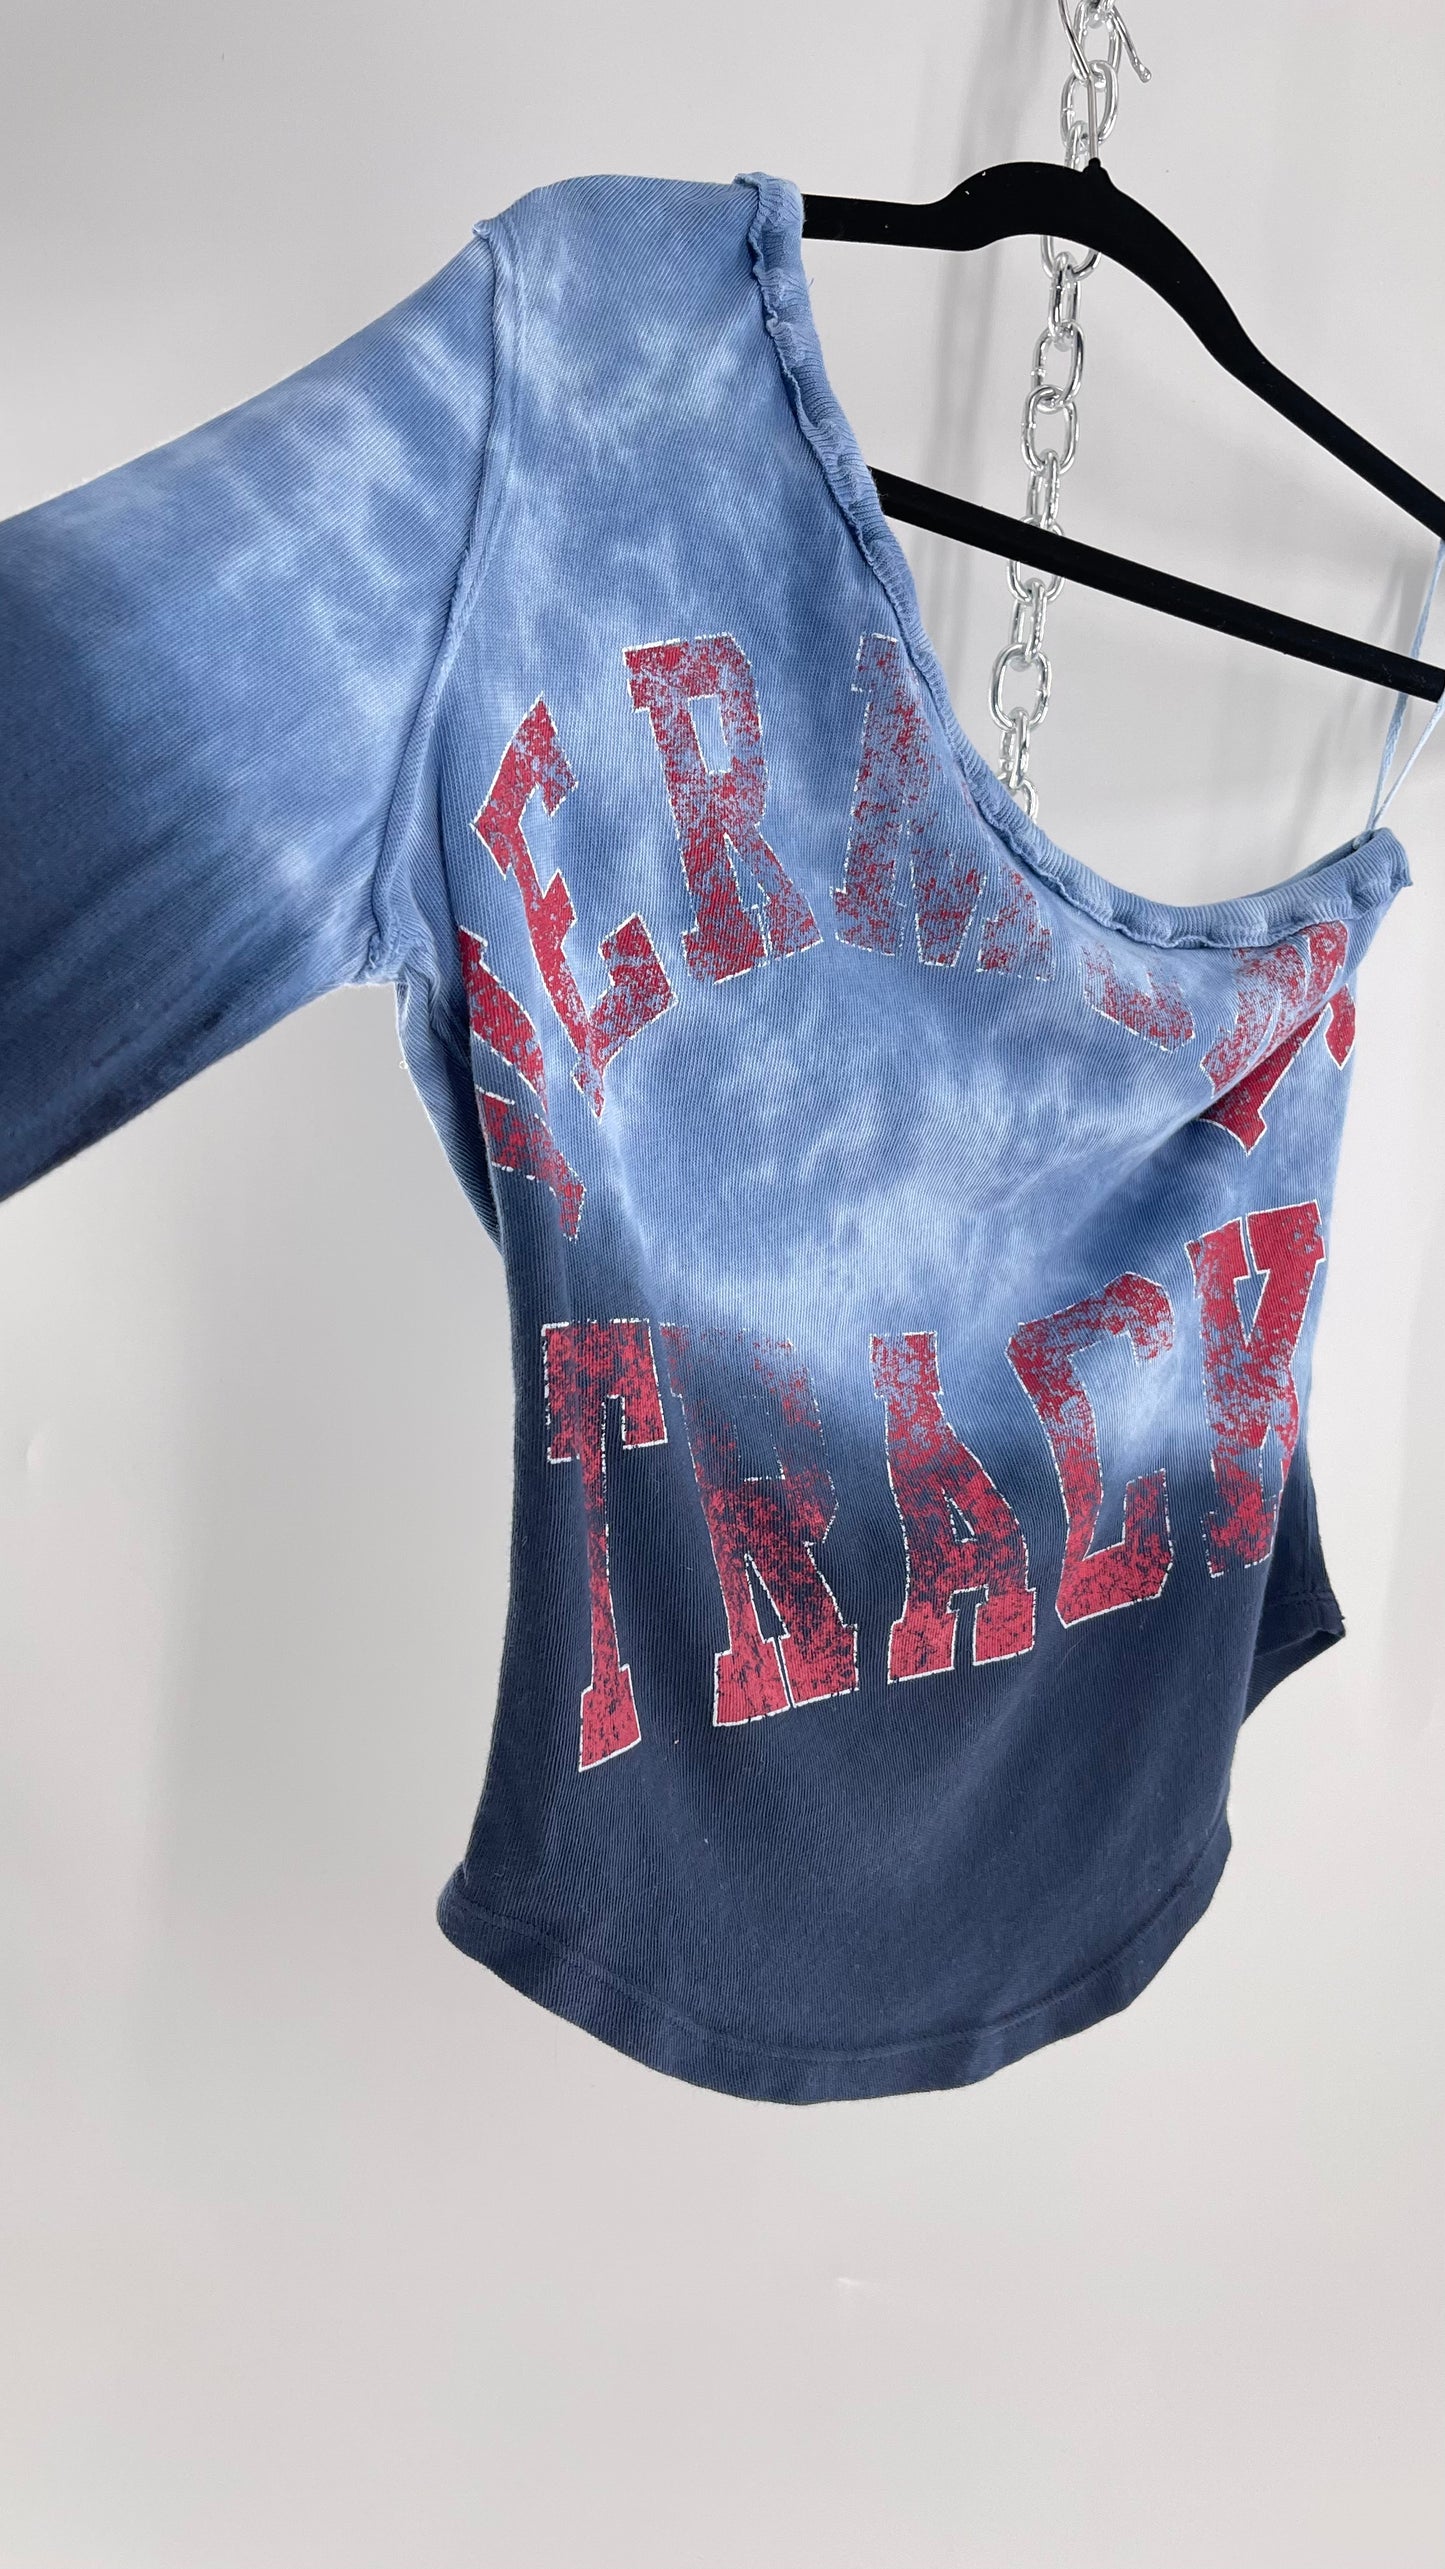 Free People Blue Ombre Tie Dye One Sleeve Top with Track Graphic (Small)